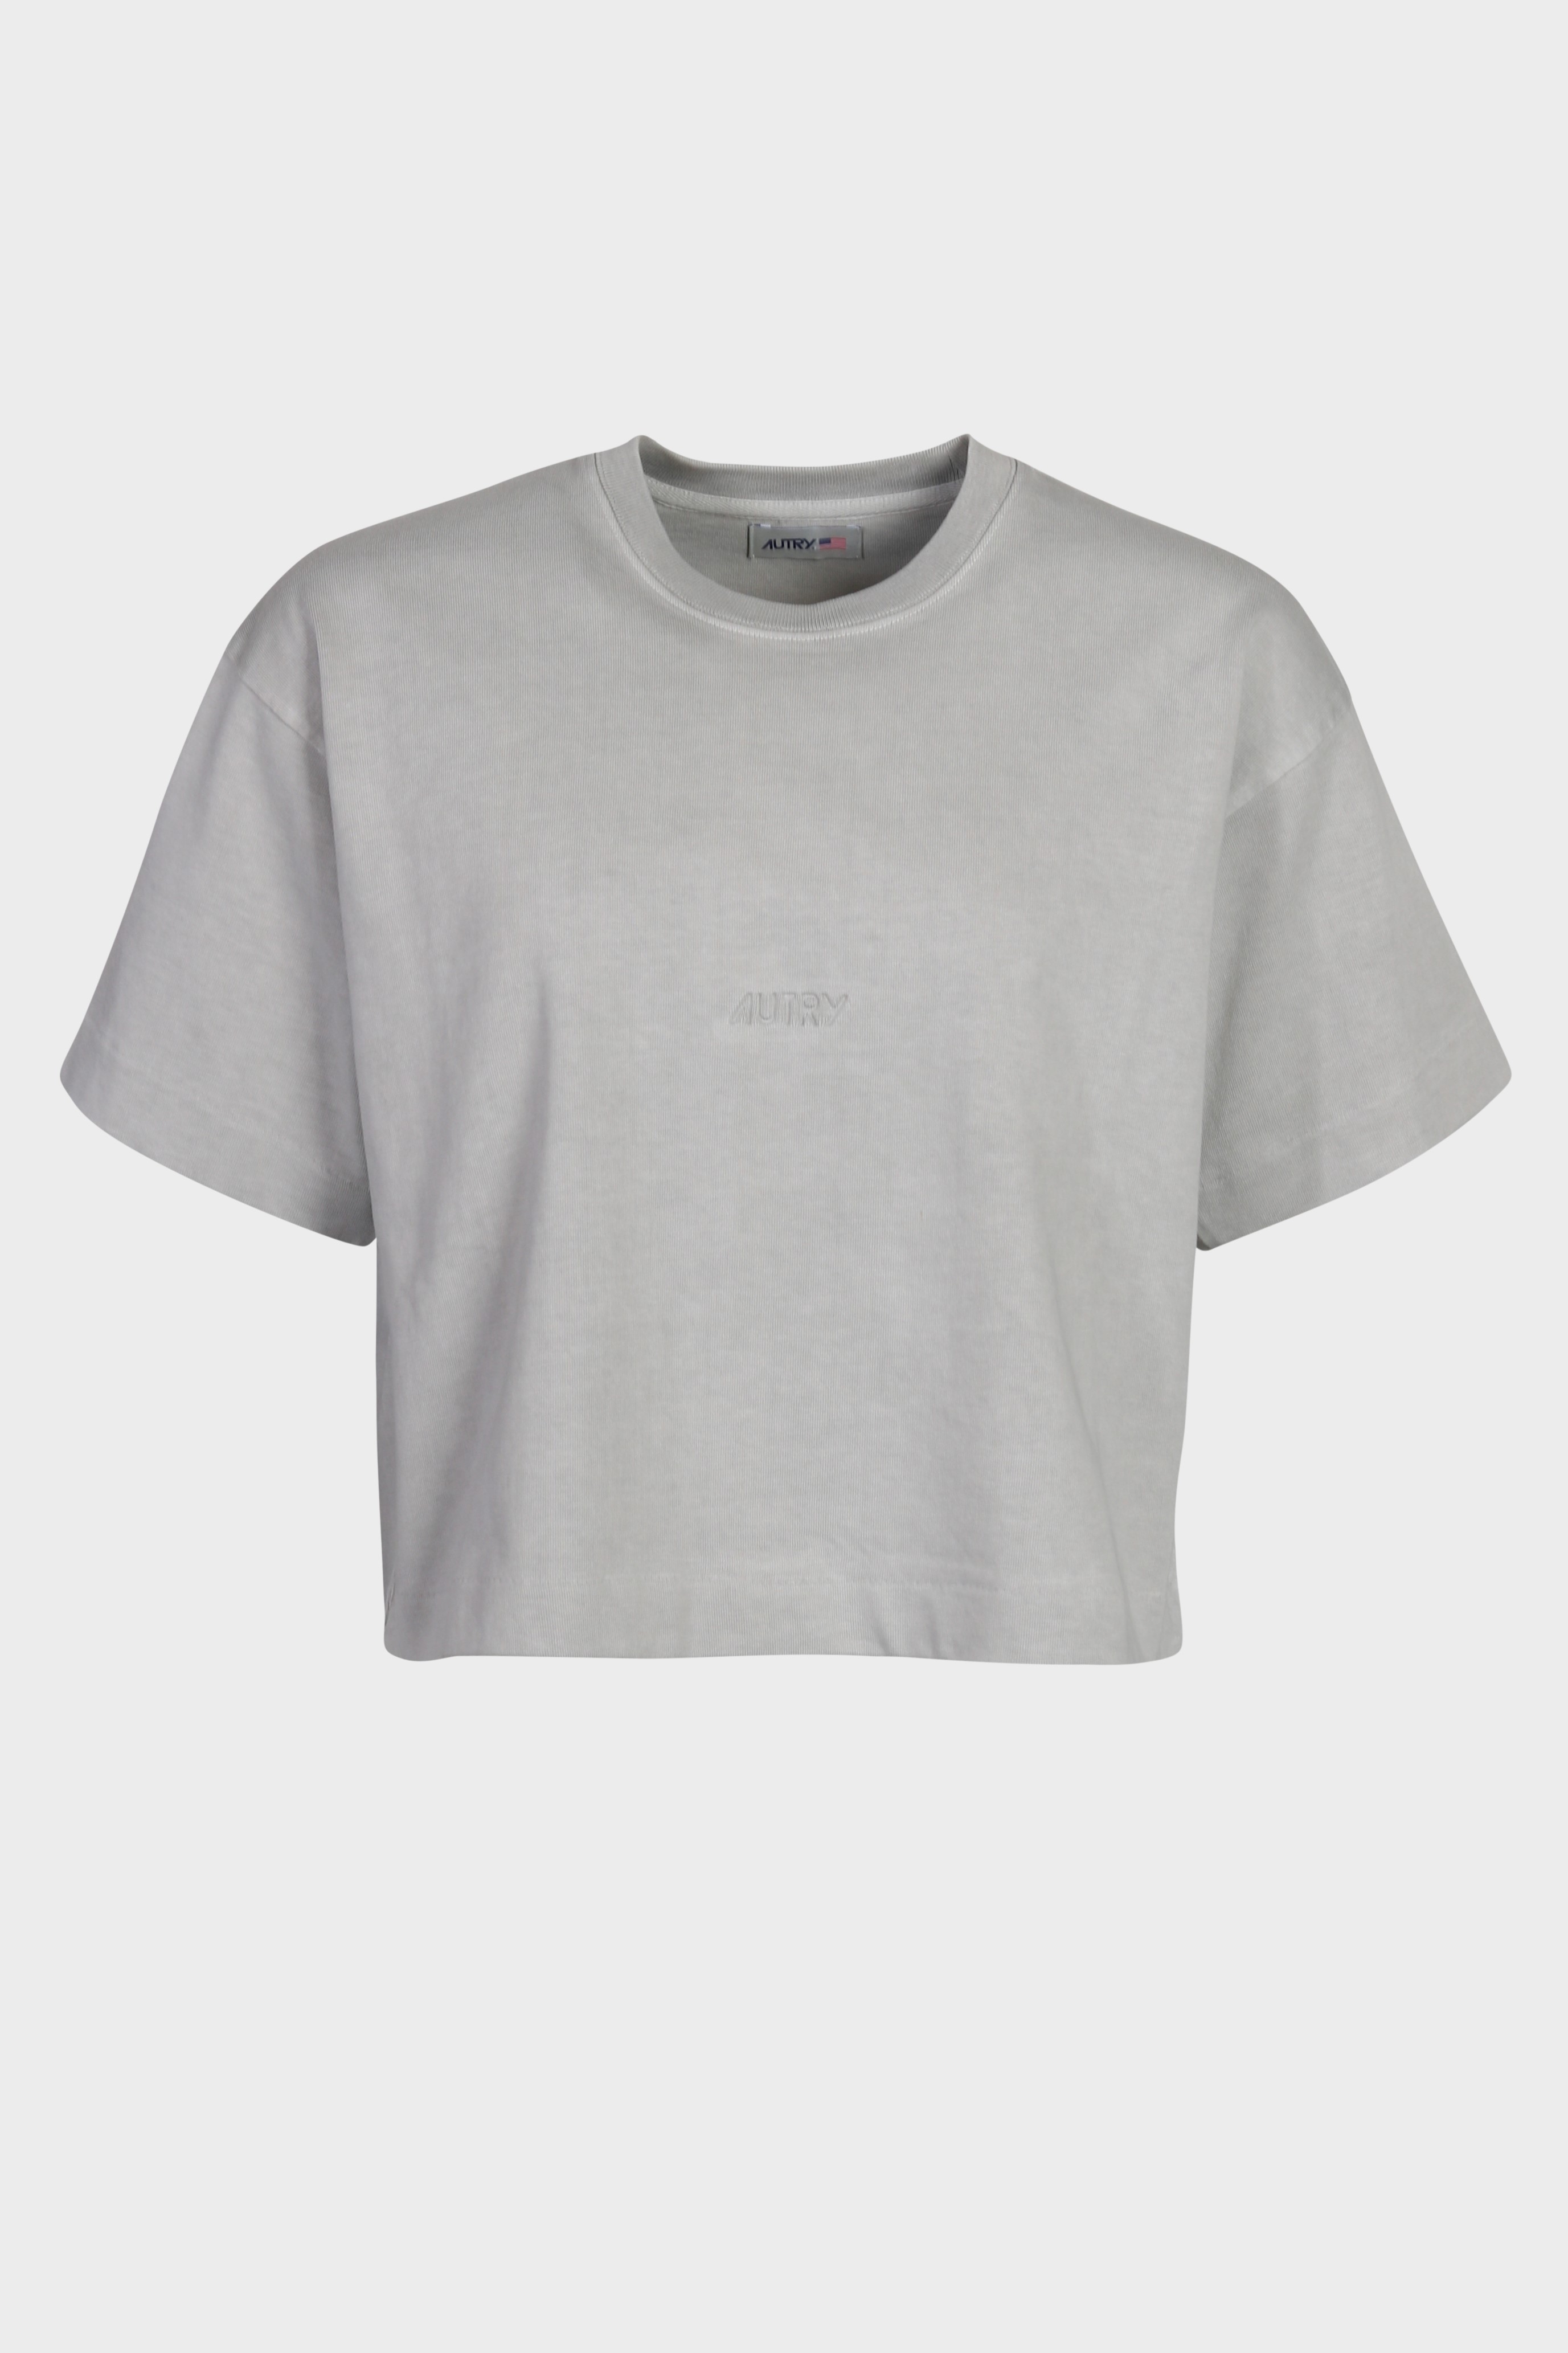 AUTRY ACTION PEOPLE Apparel T-Shirt in Grey Melange XS